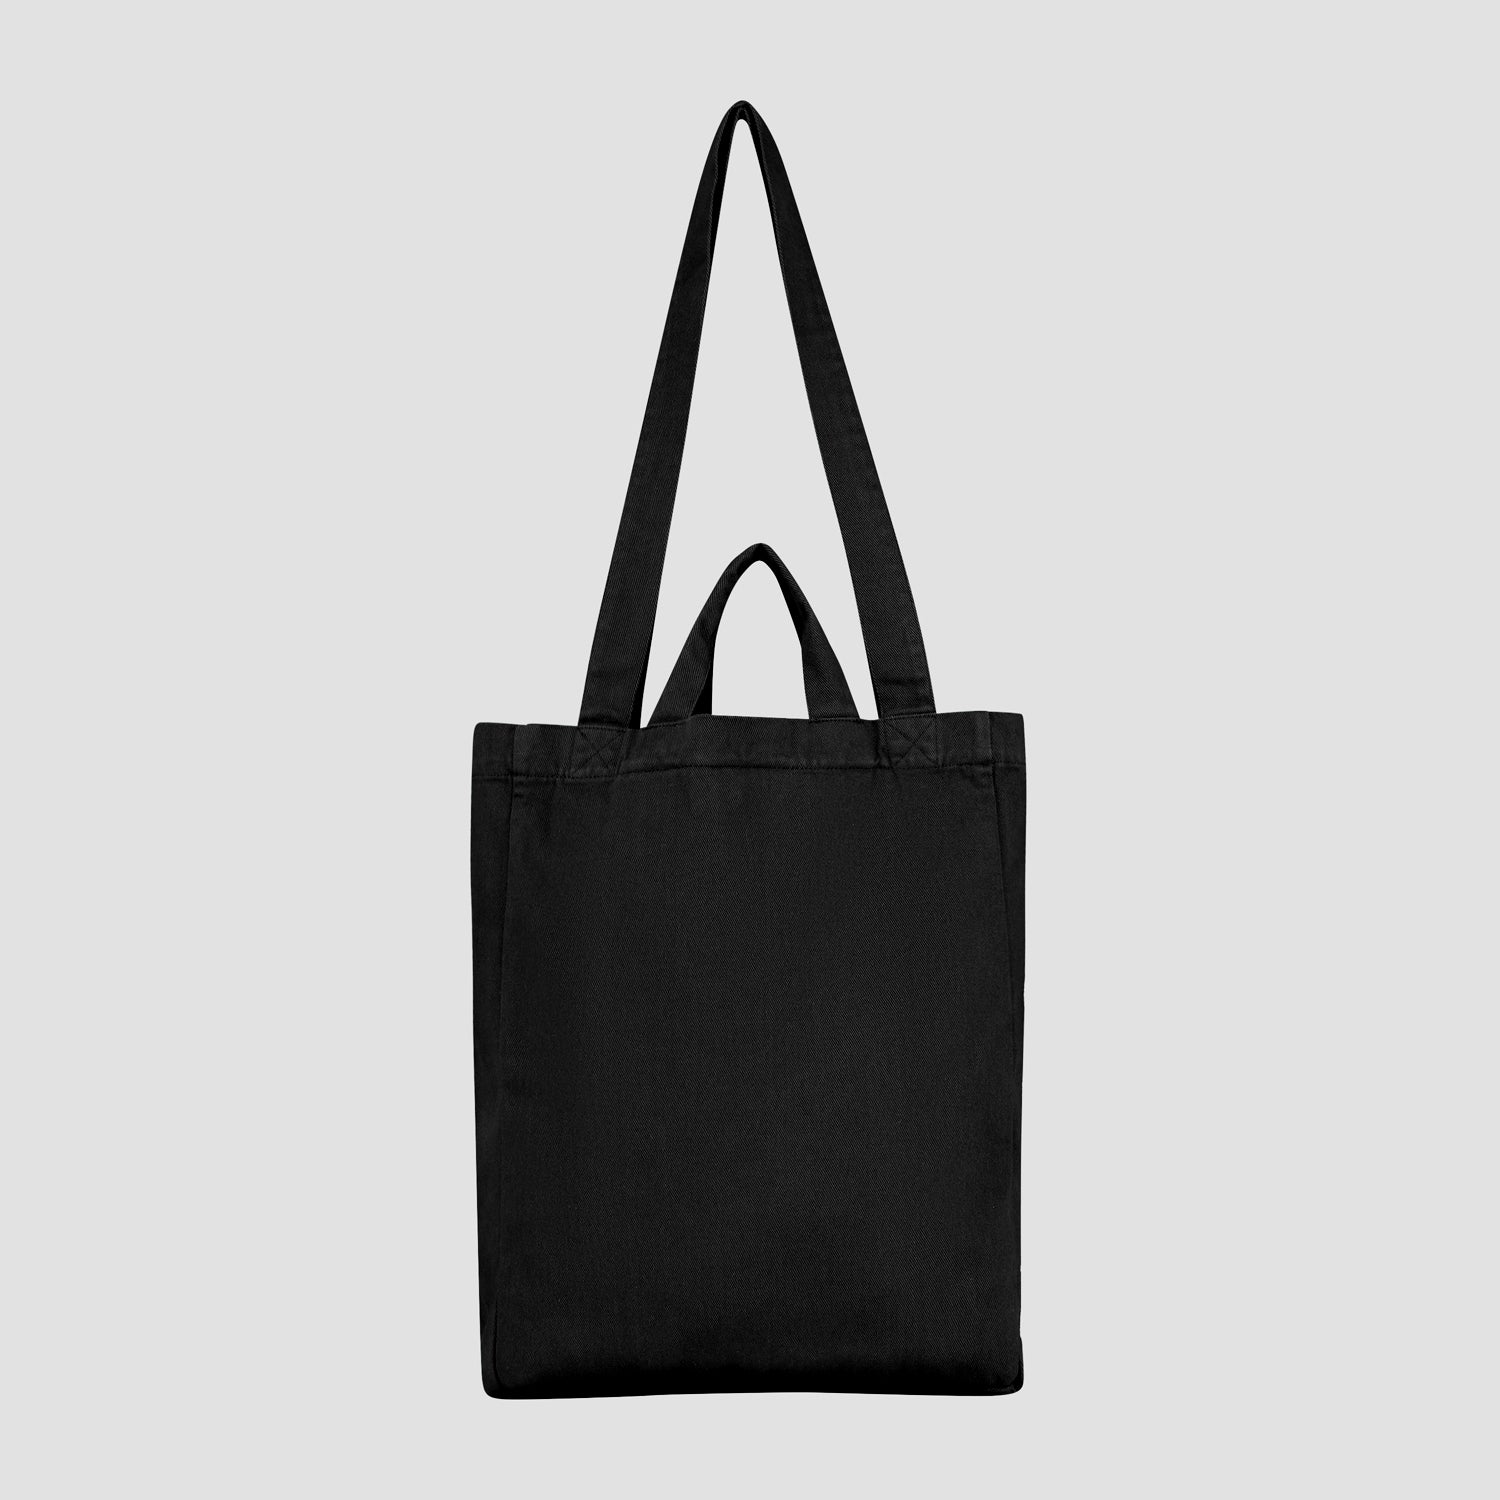 Generic 21 x 26 inch Cotton Bag Black Pack of 2500 Bags. : Amazon.in: Bags,  Wallets and Luggage